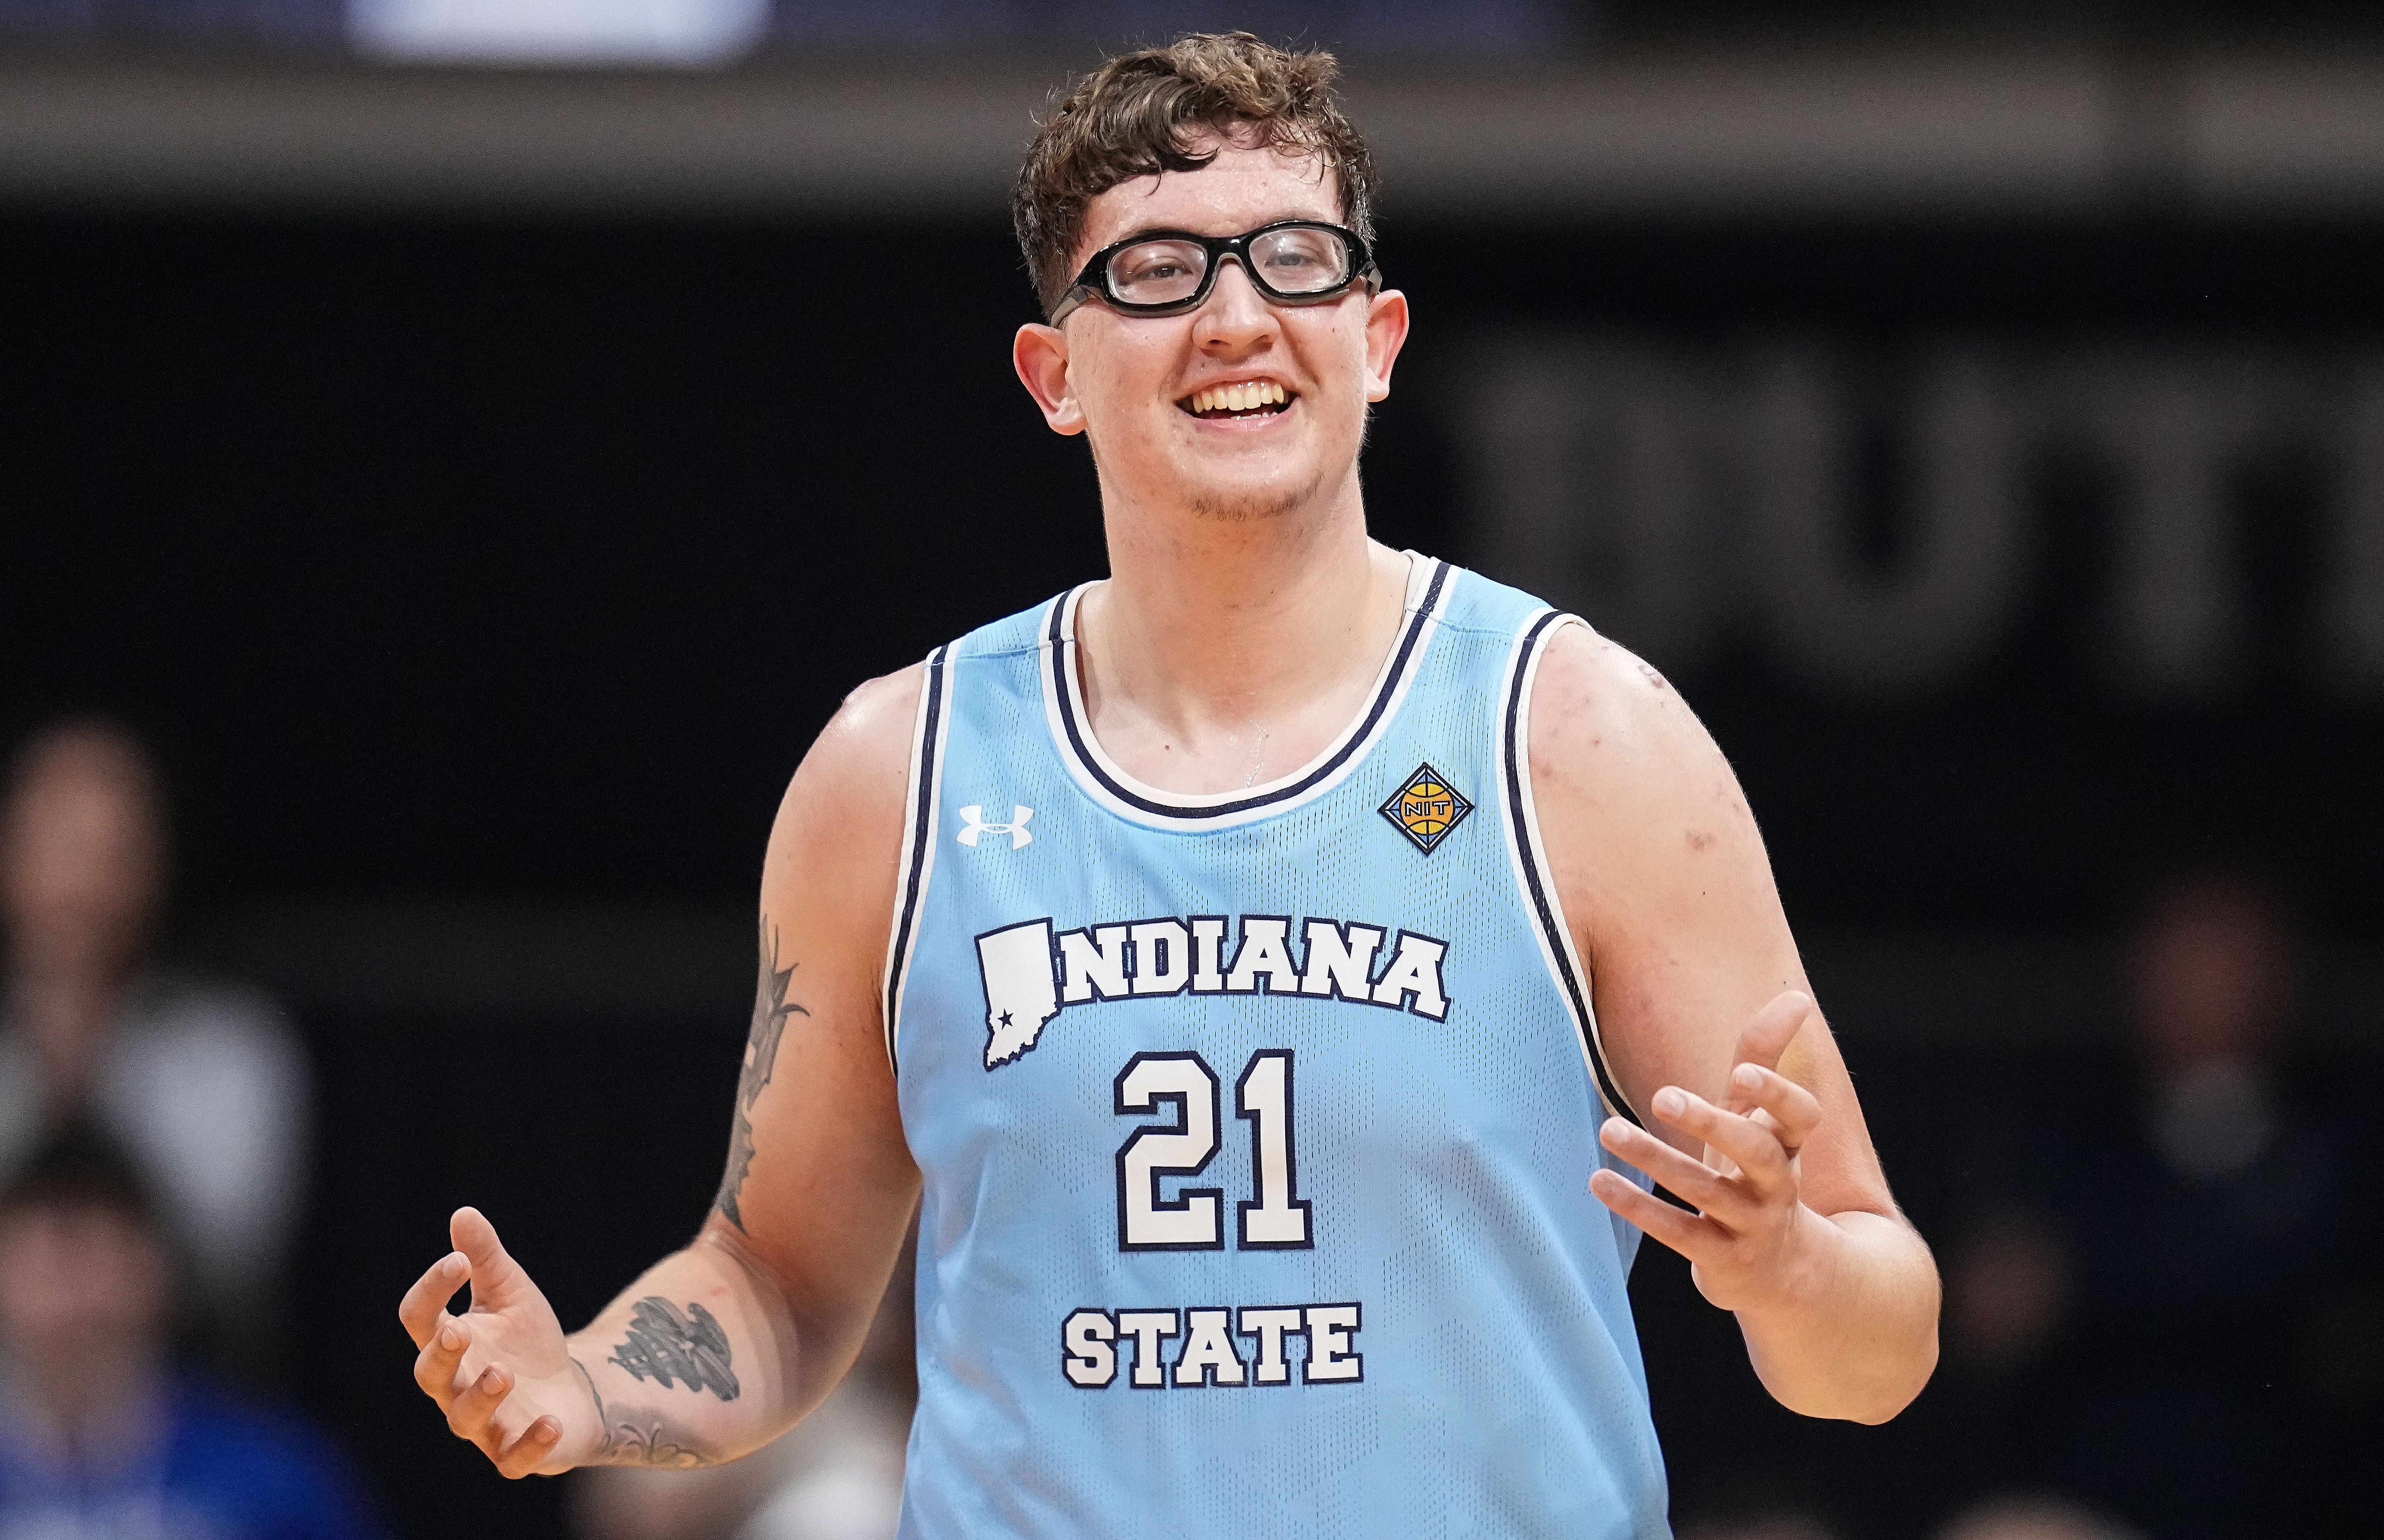 Robbie Avila entered the transfer portal after an excellent season with Indiana State. He announced his commitment to play for Saint Louis in the 2024-25 season.